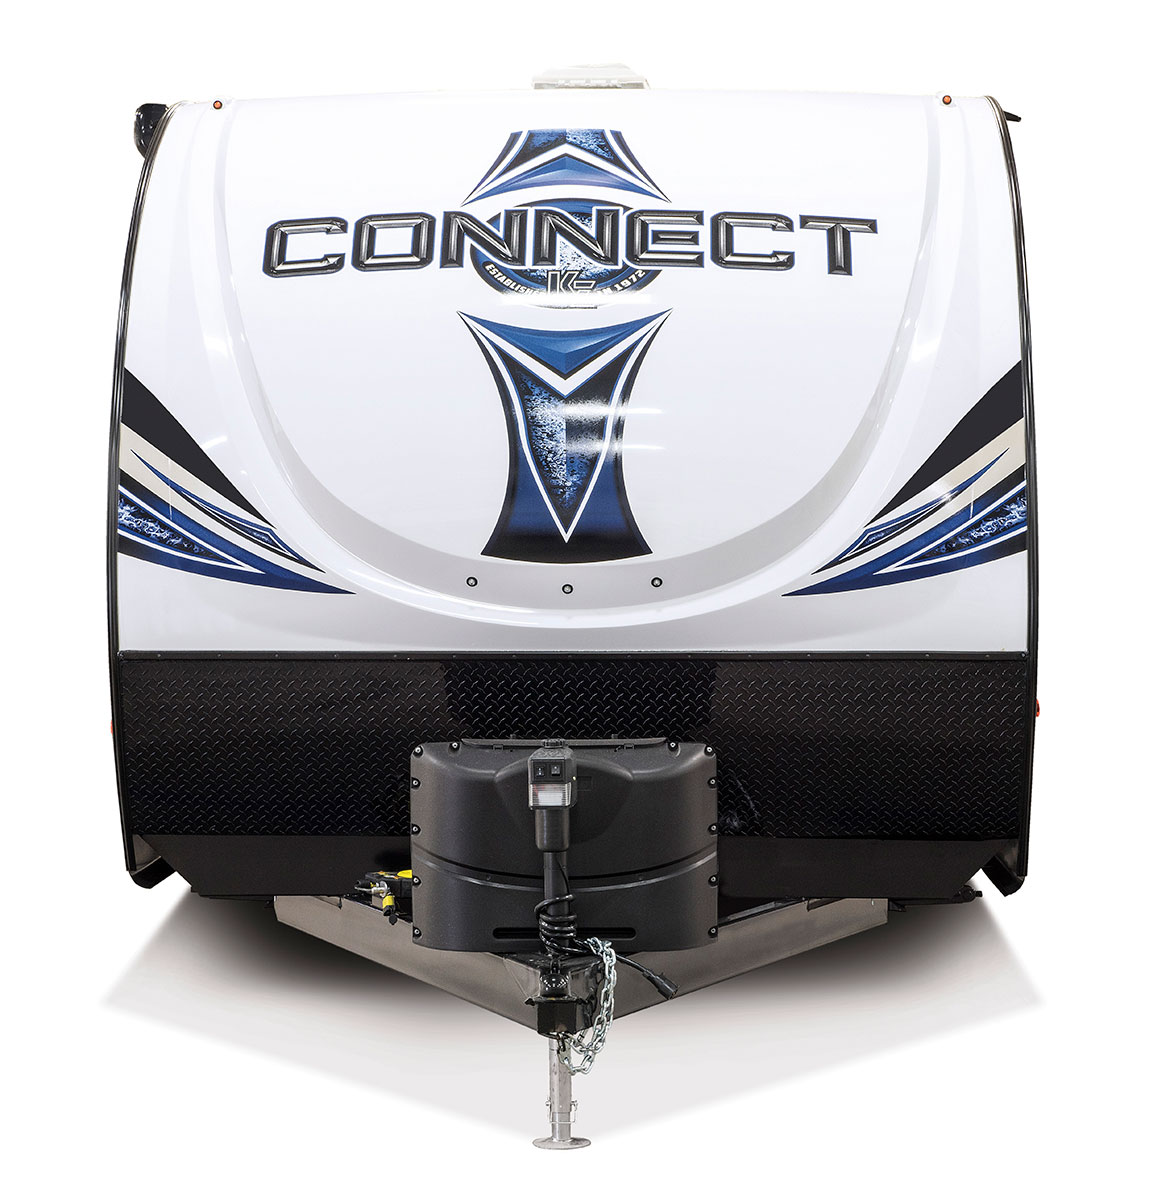 rv connect travel trailers